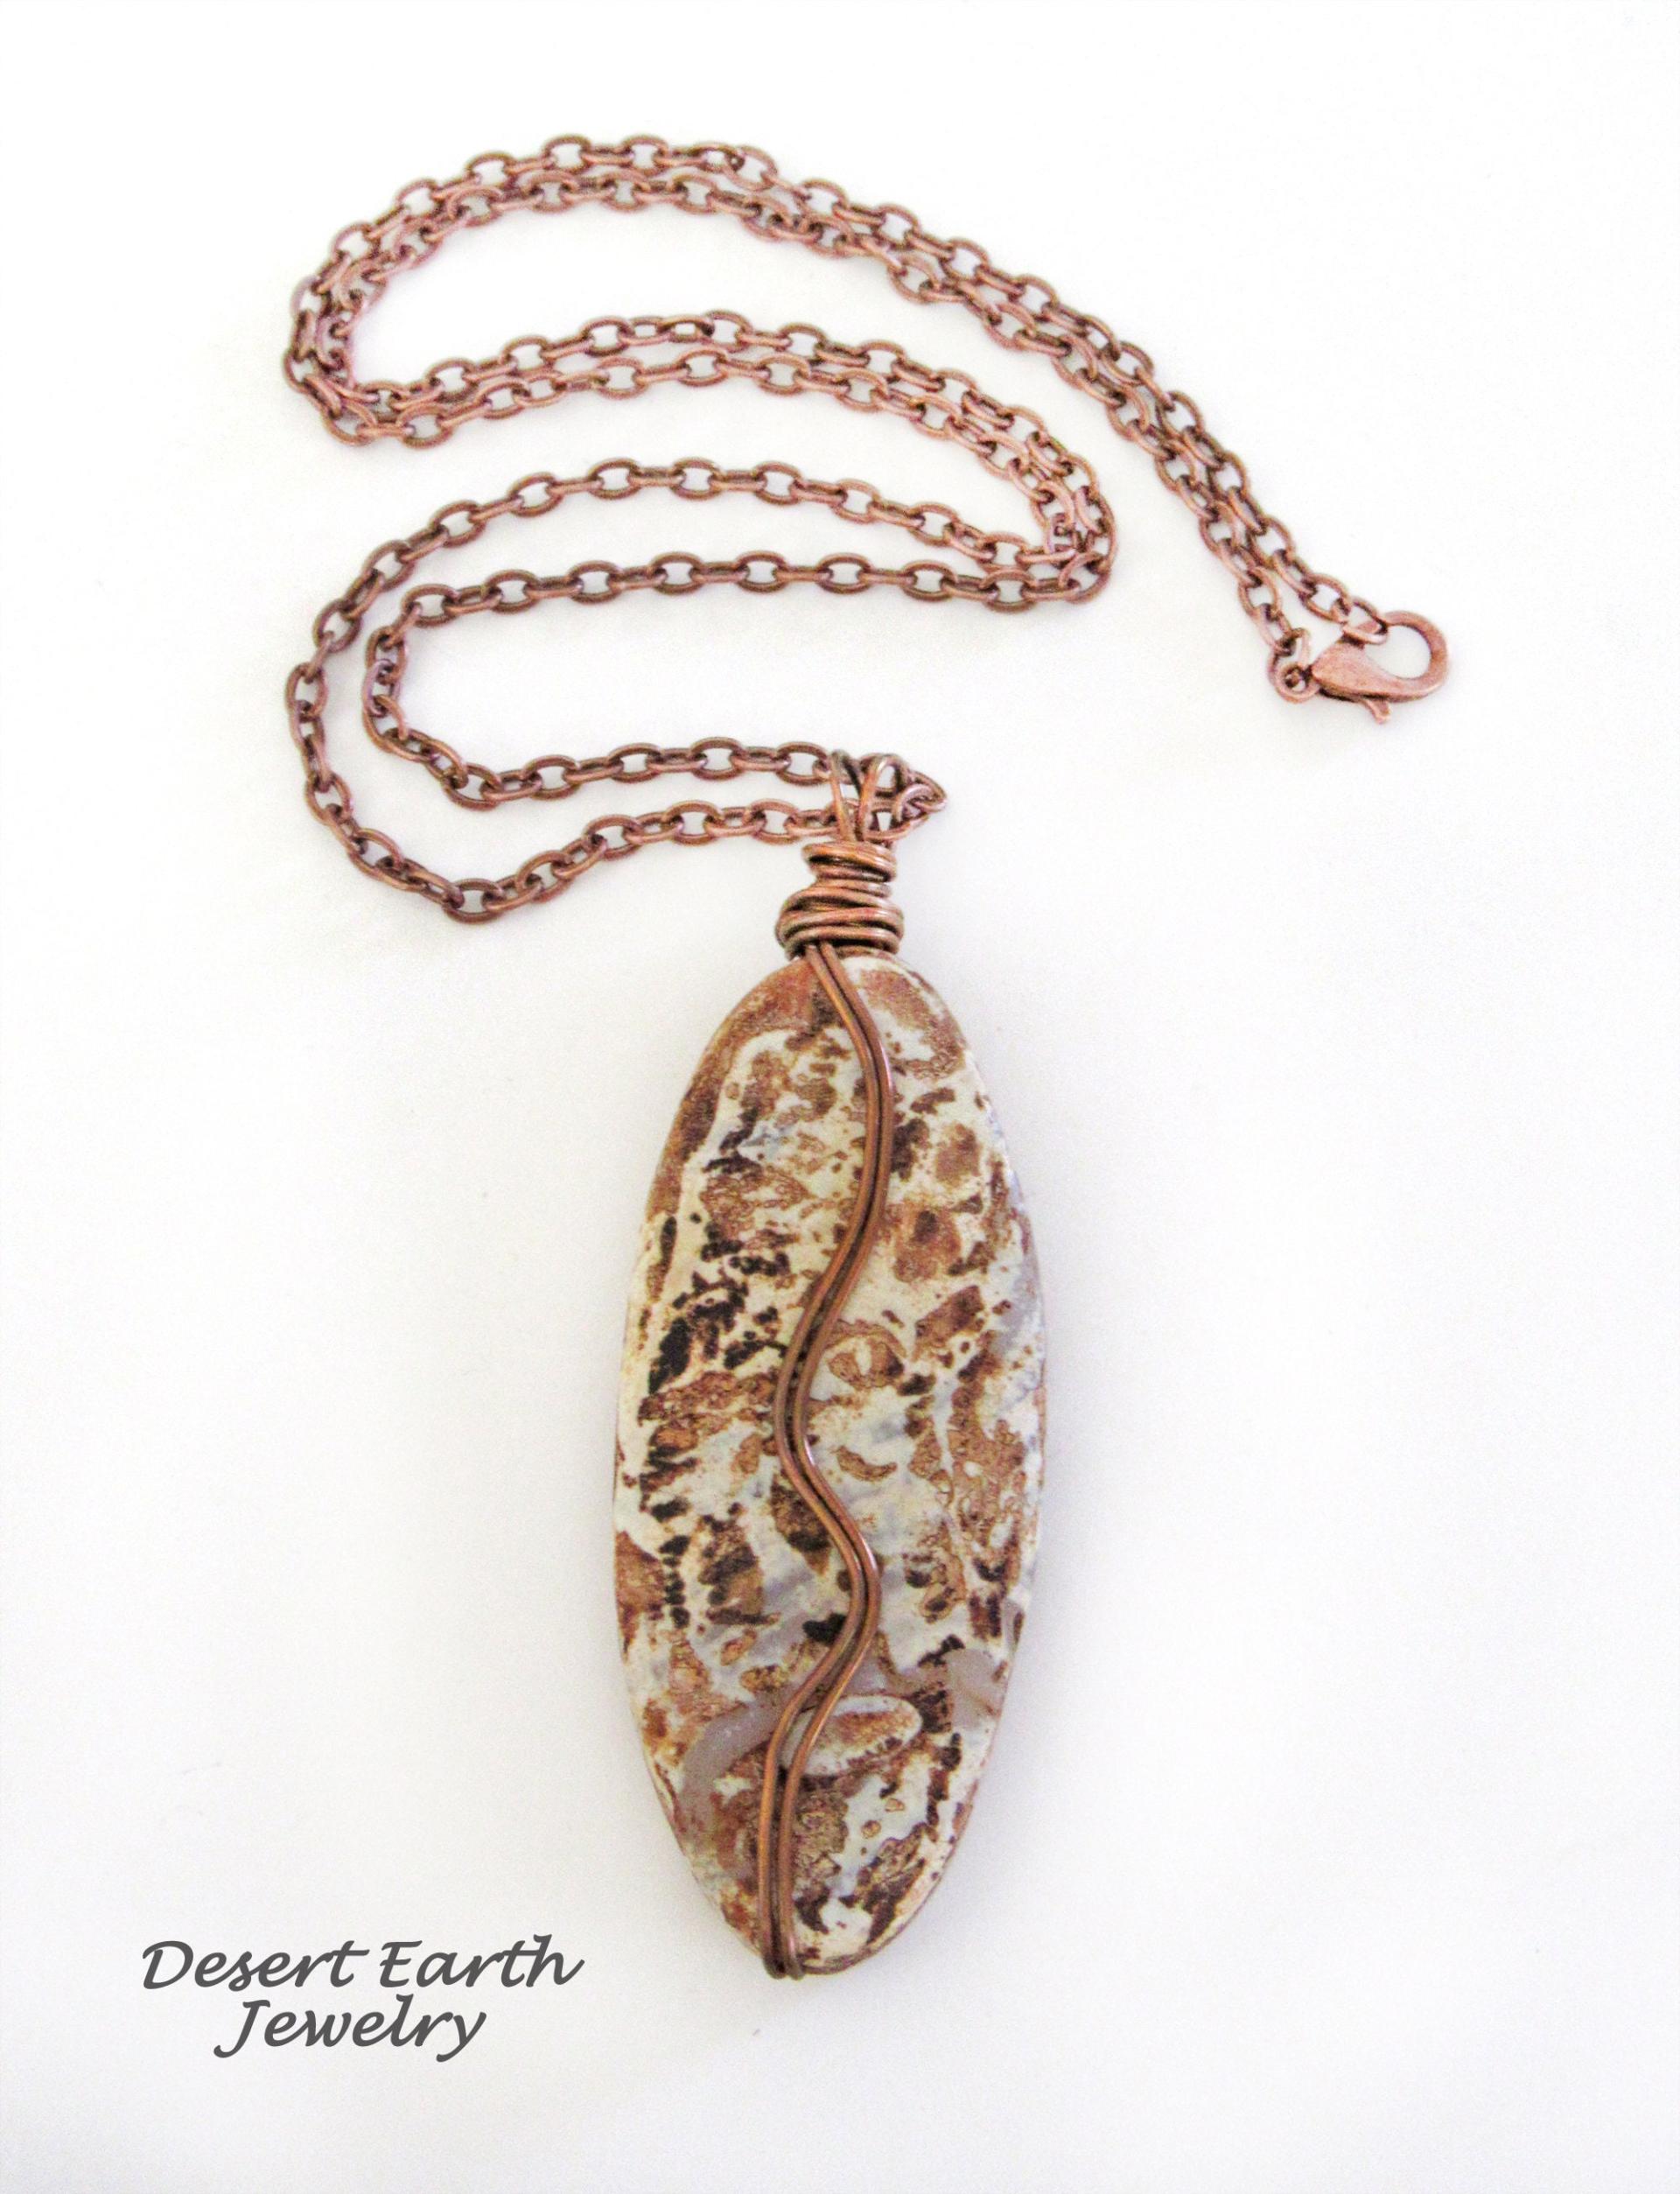 Rusty Brown Agate Stone Necklace with Copper Chain - Earthy Rustic Wire Wrapped Natural Stone Jewelry for Men / Women